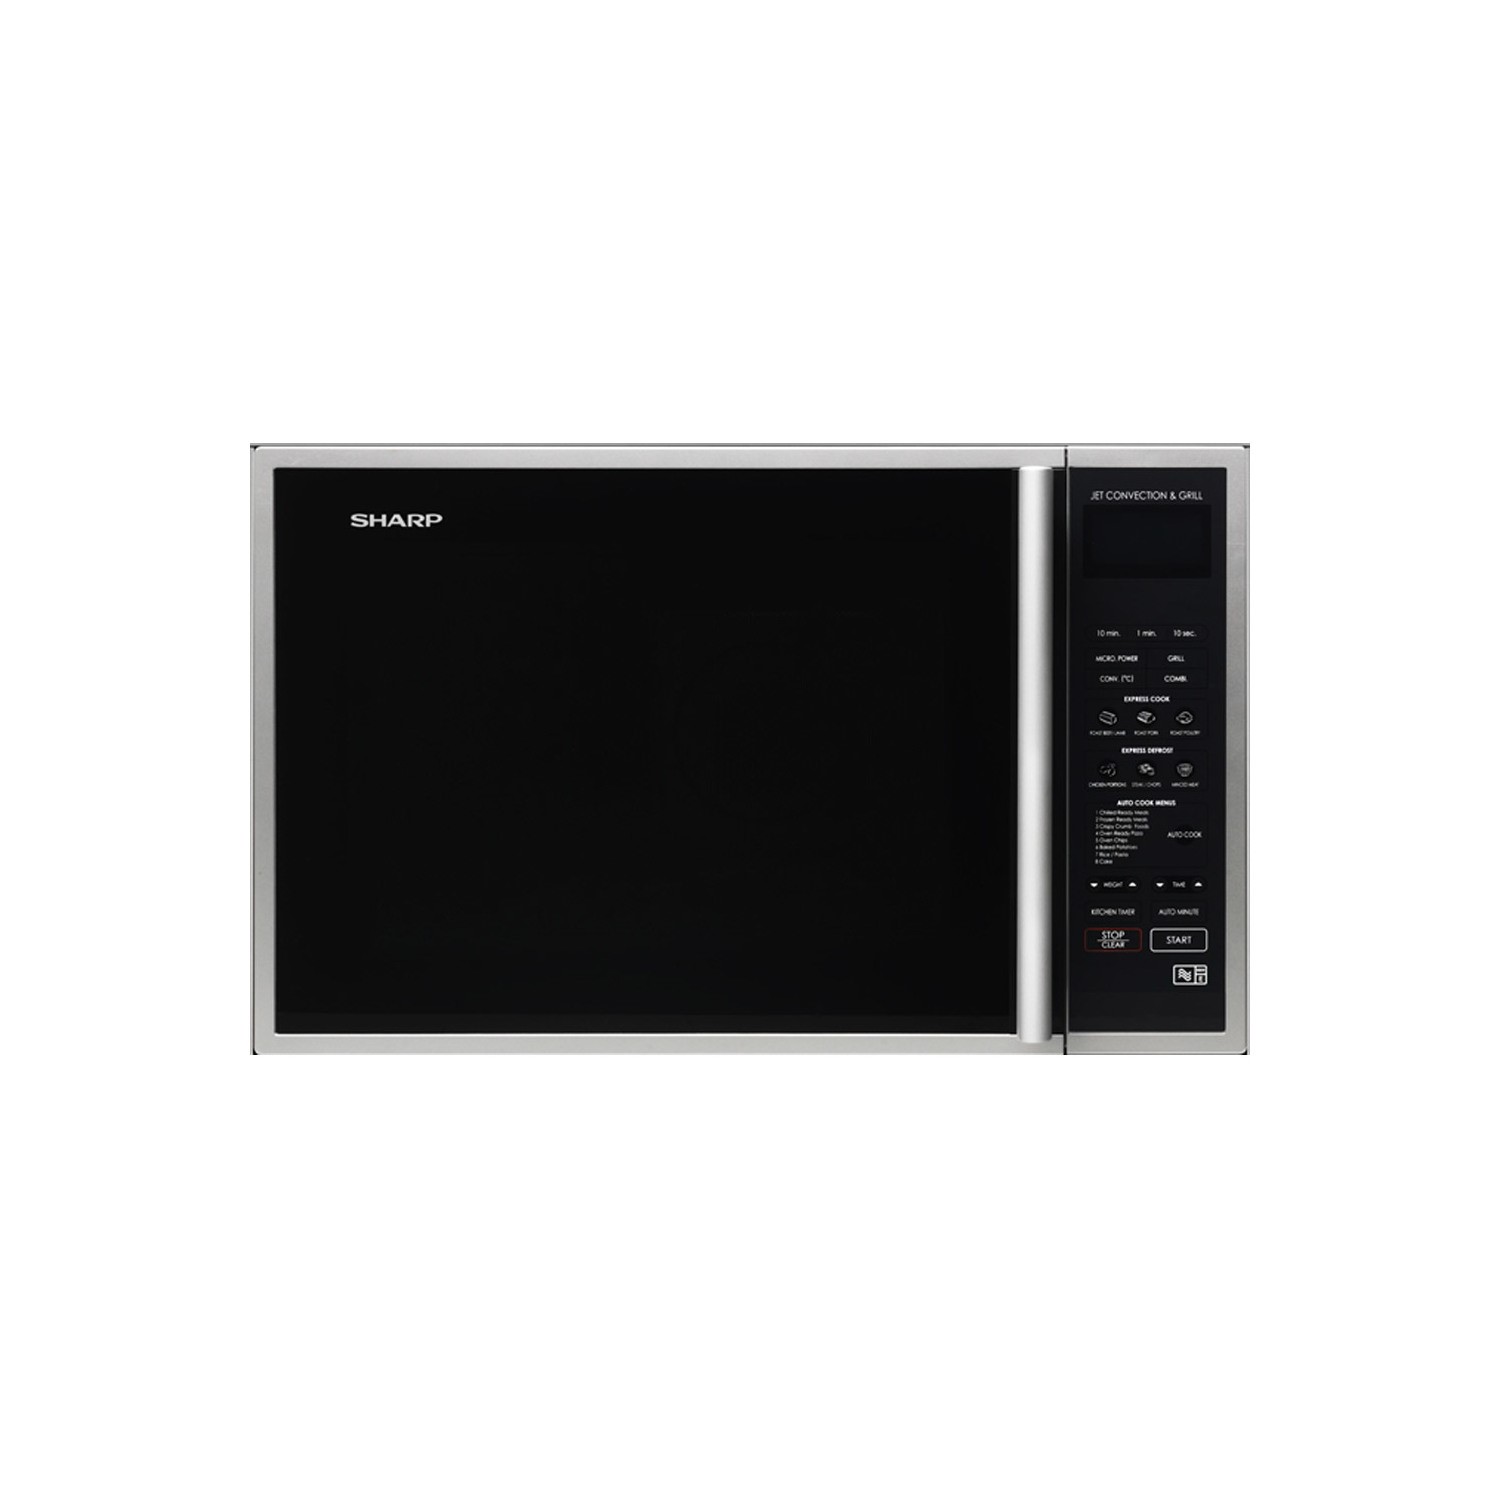 Photos - Other for Computer Sharp 40L 900W Digital Combination Microwave Oven and Grill - Silver & R95 